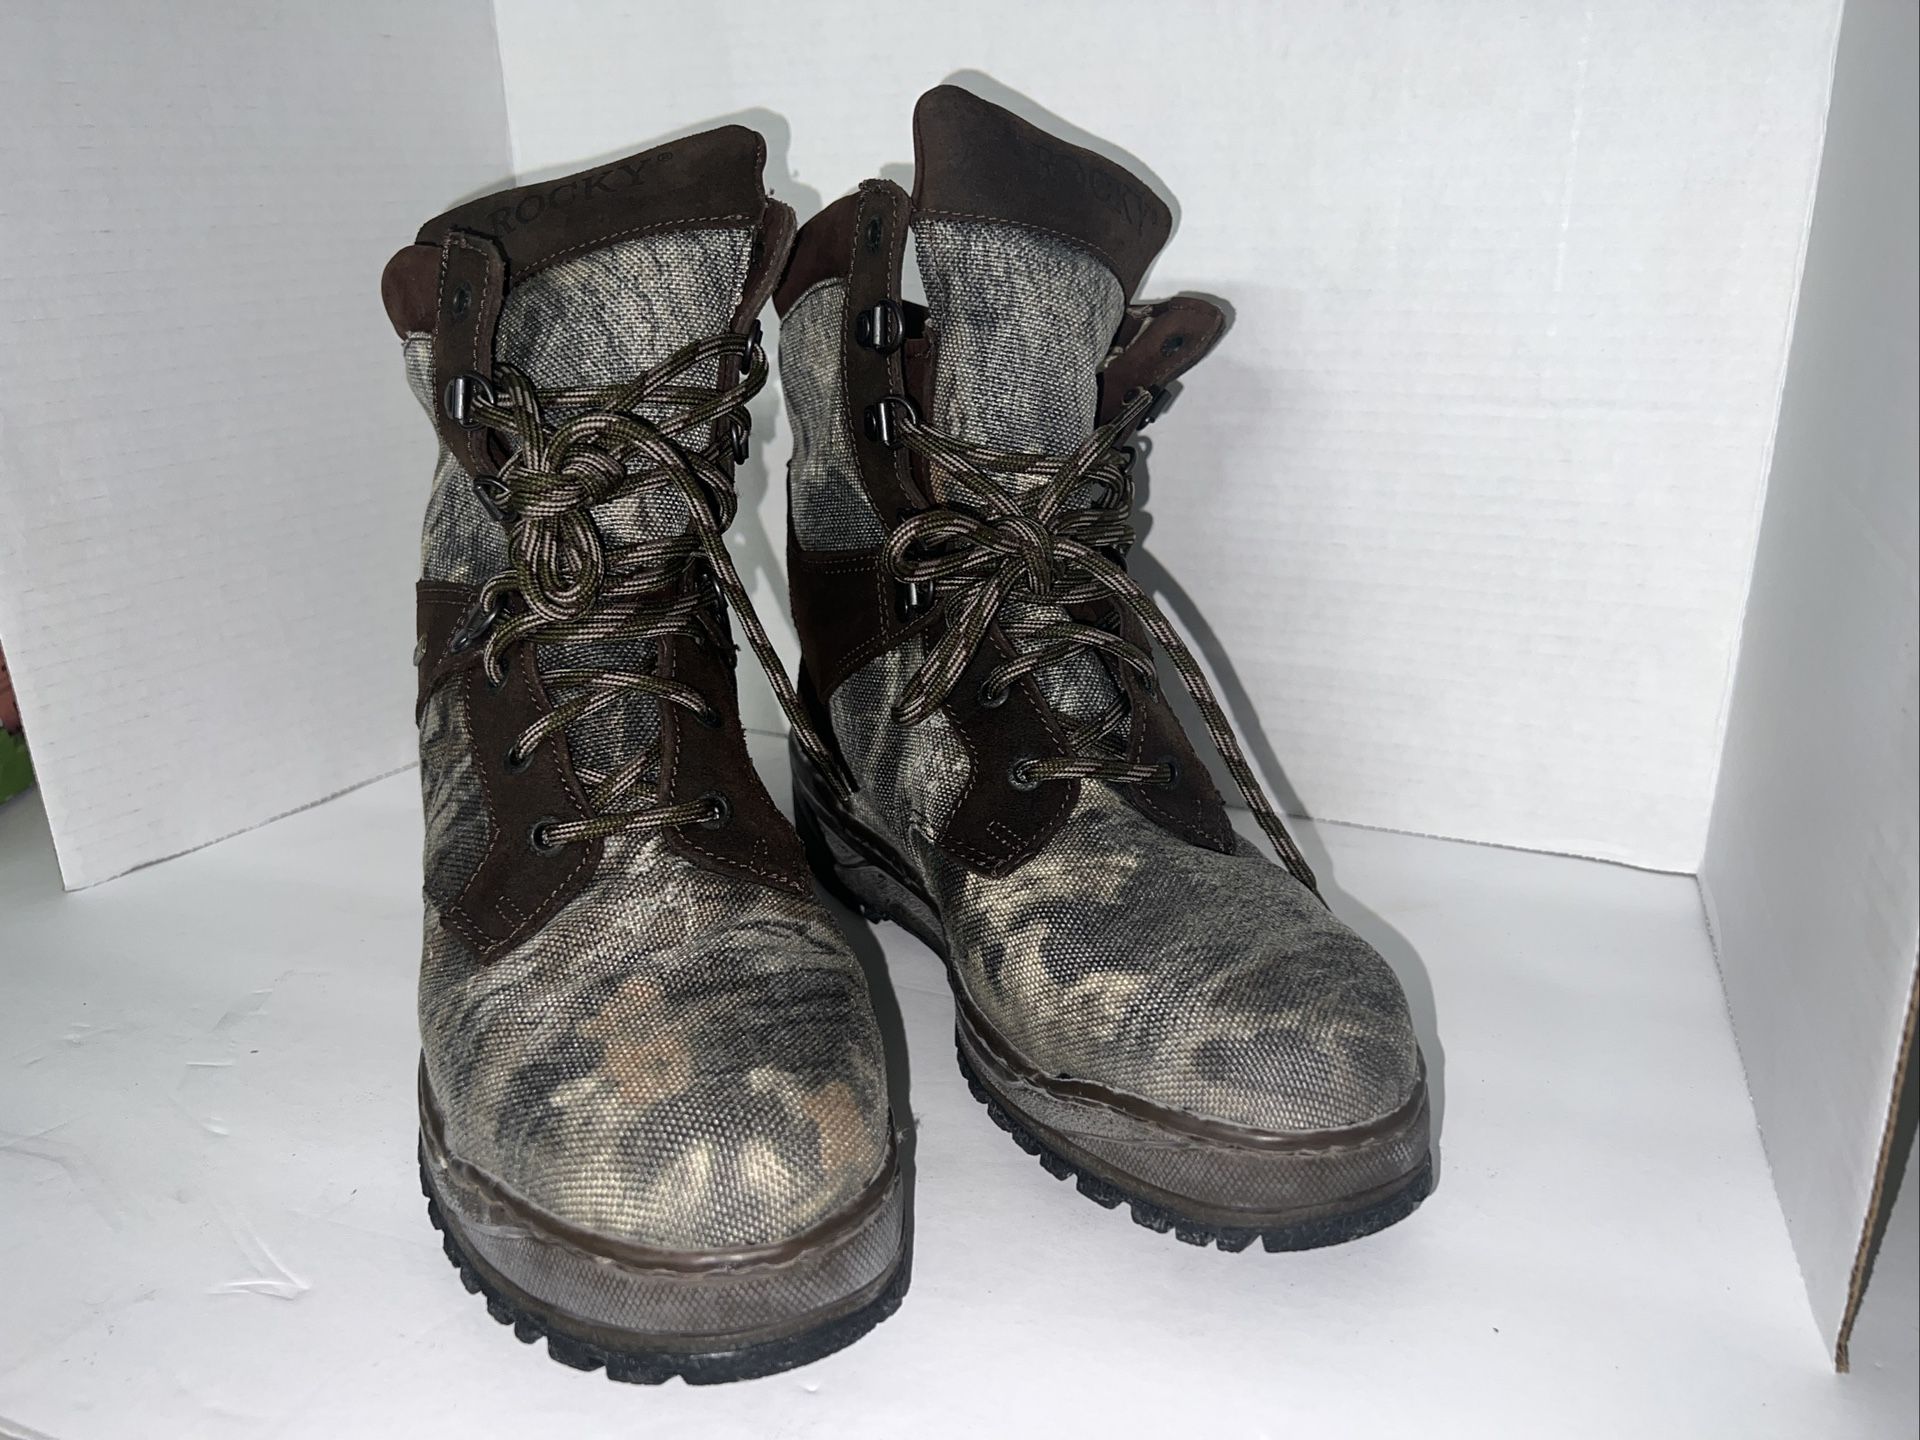 Rocky Camo Boots Gore Tex Bigfoot Thinsulate Size 10 Wide Steel Toe